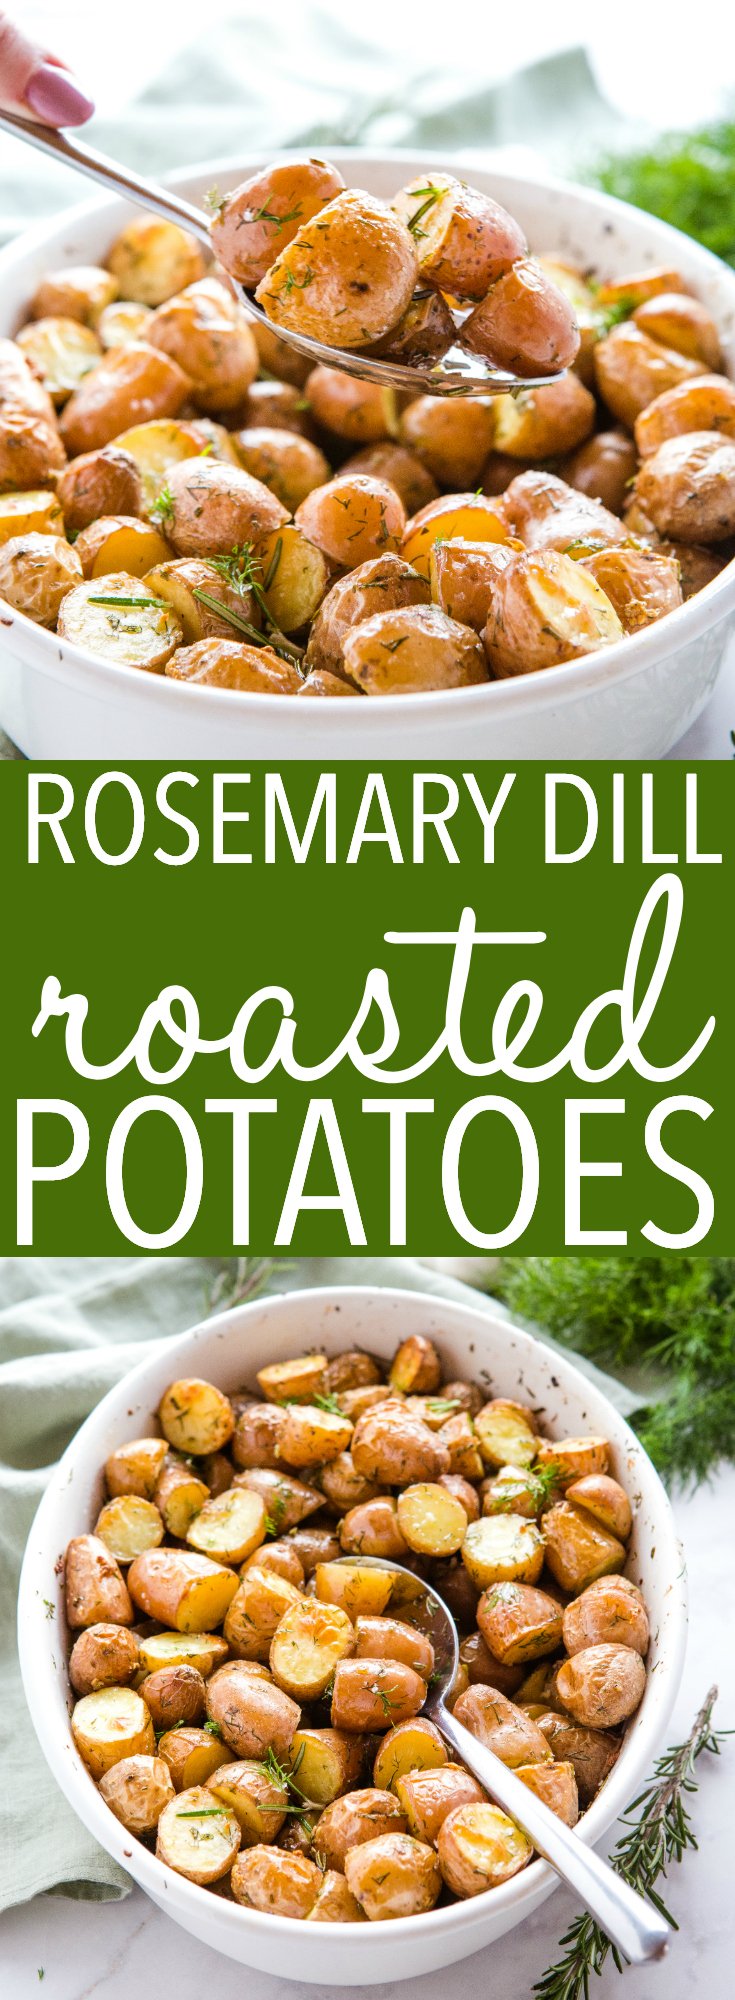 These Rosemary Dill Roasted Potatoes are the perfect side dish for any family meal! Make them in about 30 minutes with only a few basic ingredients! Recipe from thebusybaker.ca! #potatoes #rosemary #dill #sidedish #easter #christmas #holiday #family #meal #roasted via @busybakerblog